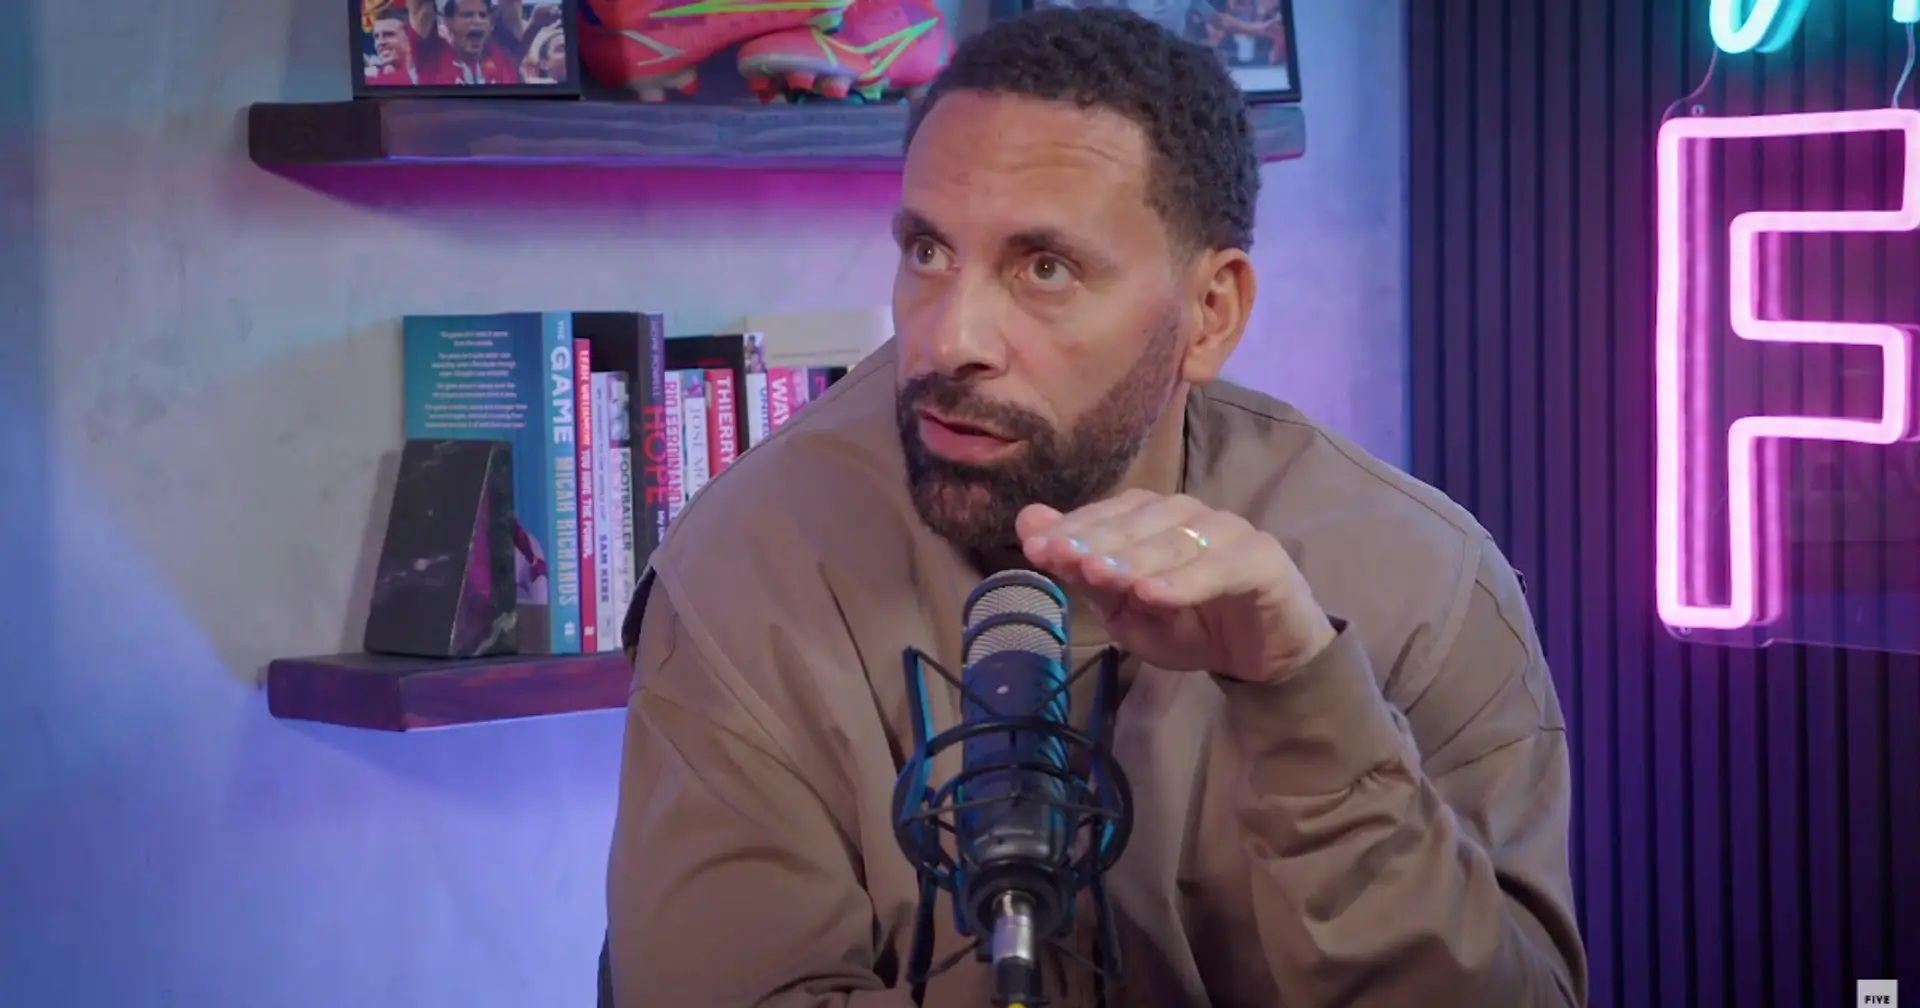 'I feel sorry for Saka': Rio Ferdinand reflects on 'world-class' controversy he started